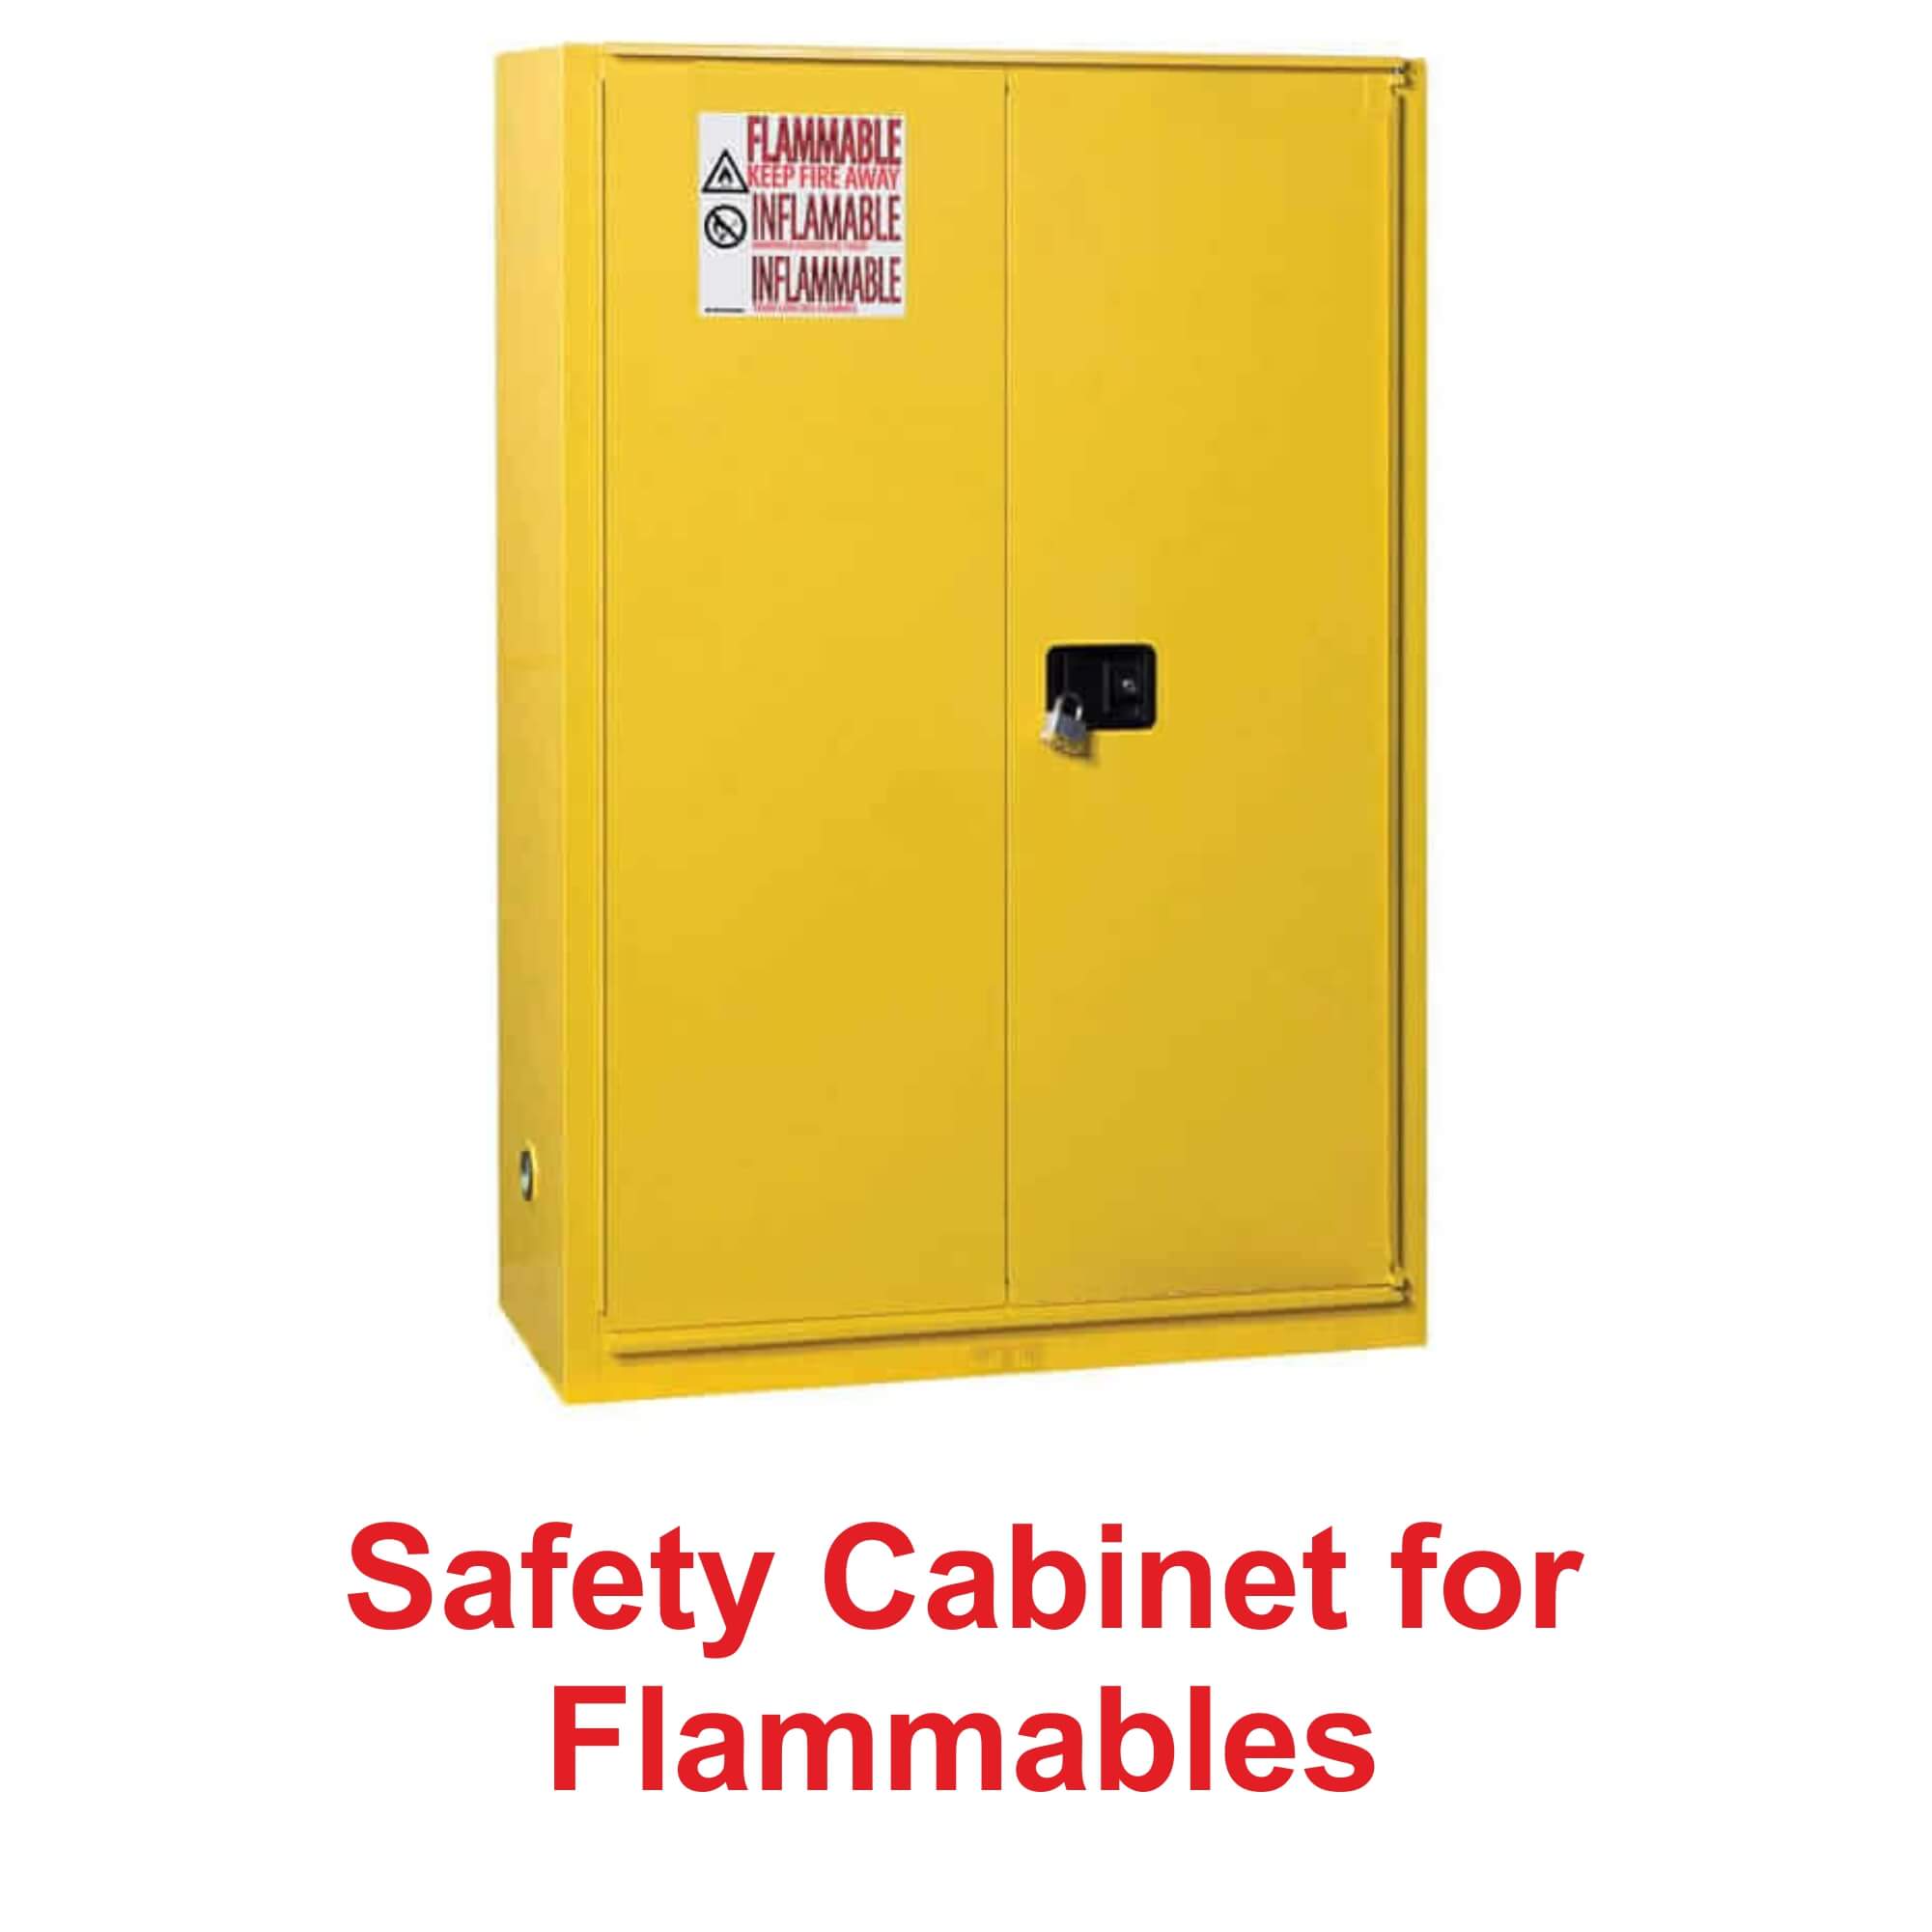 Safety Cabinet for Flammables Manufacturer in India